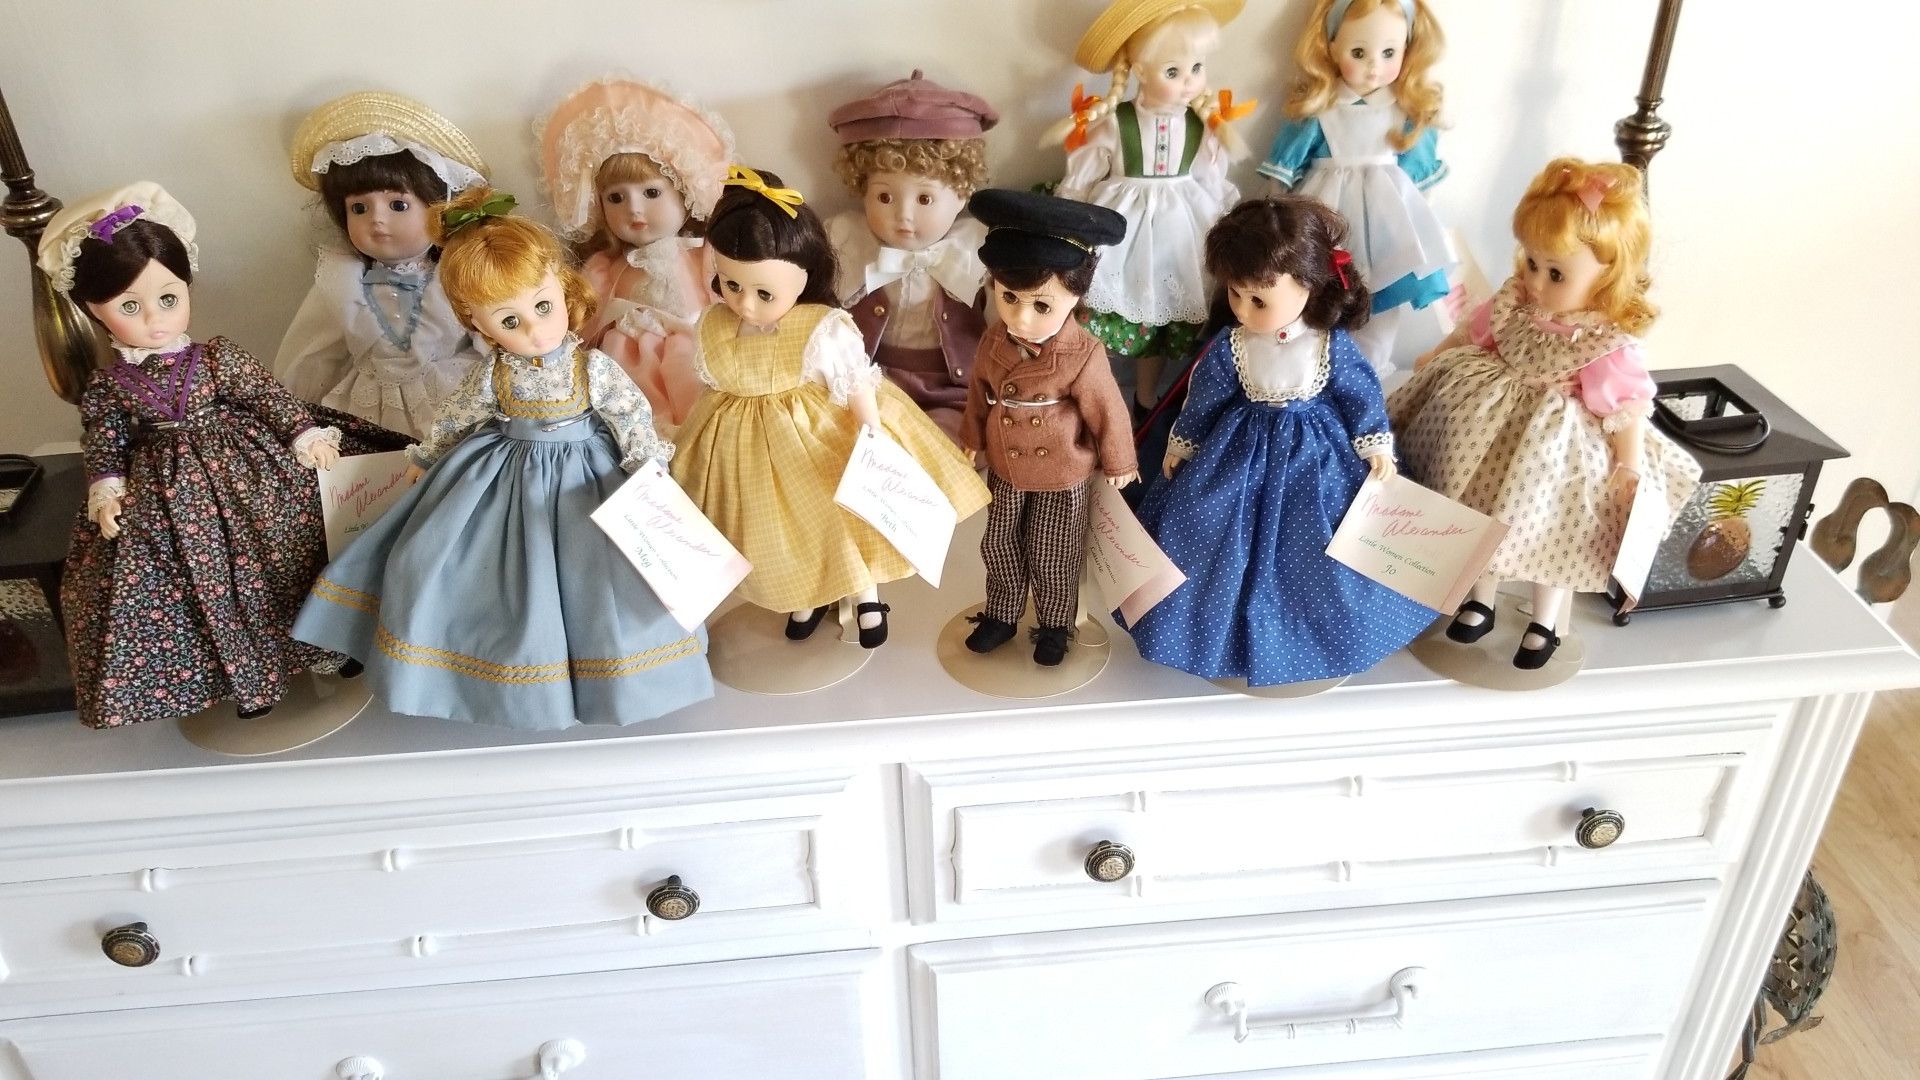 GREAT COLLECTION OF SOUTHERN HERITAGE DOLLS